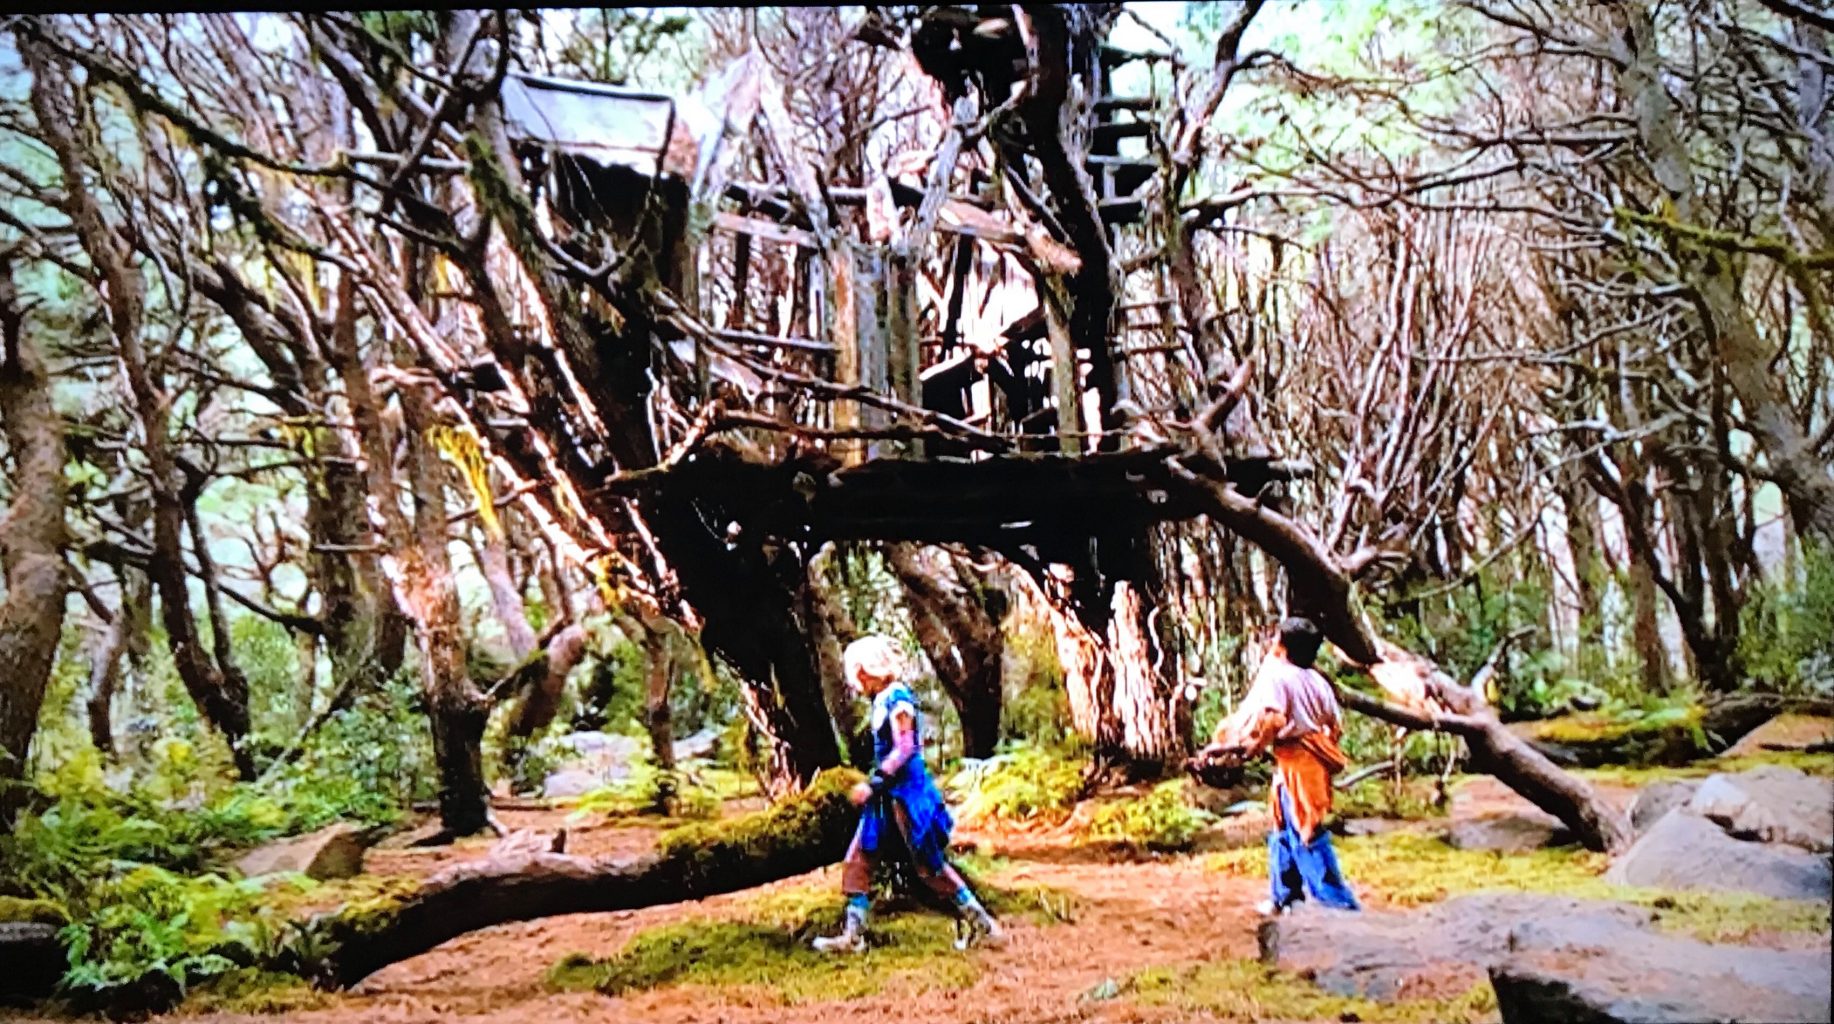 A scene from Bridge to Terabithia where a girl and guy walk in a forest in front of a large wooden treehouse